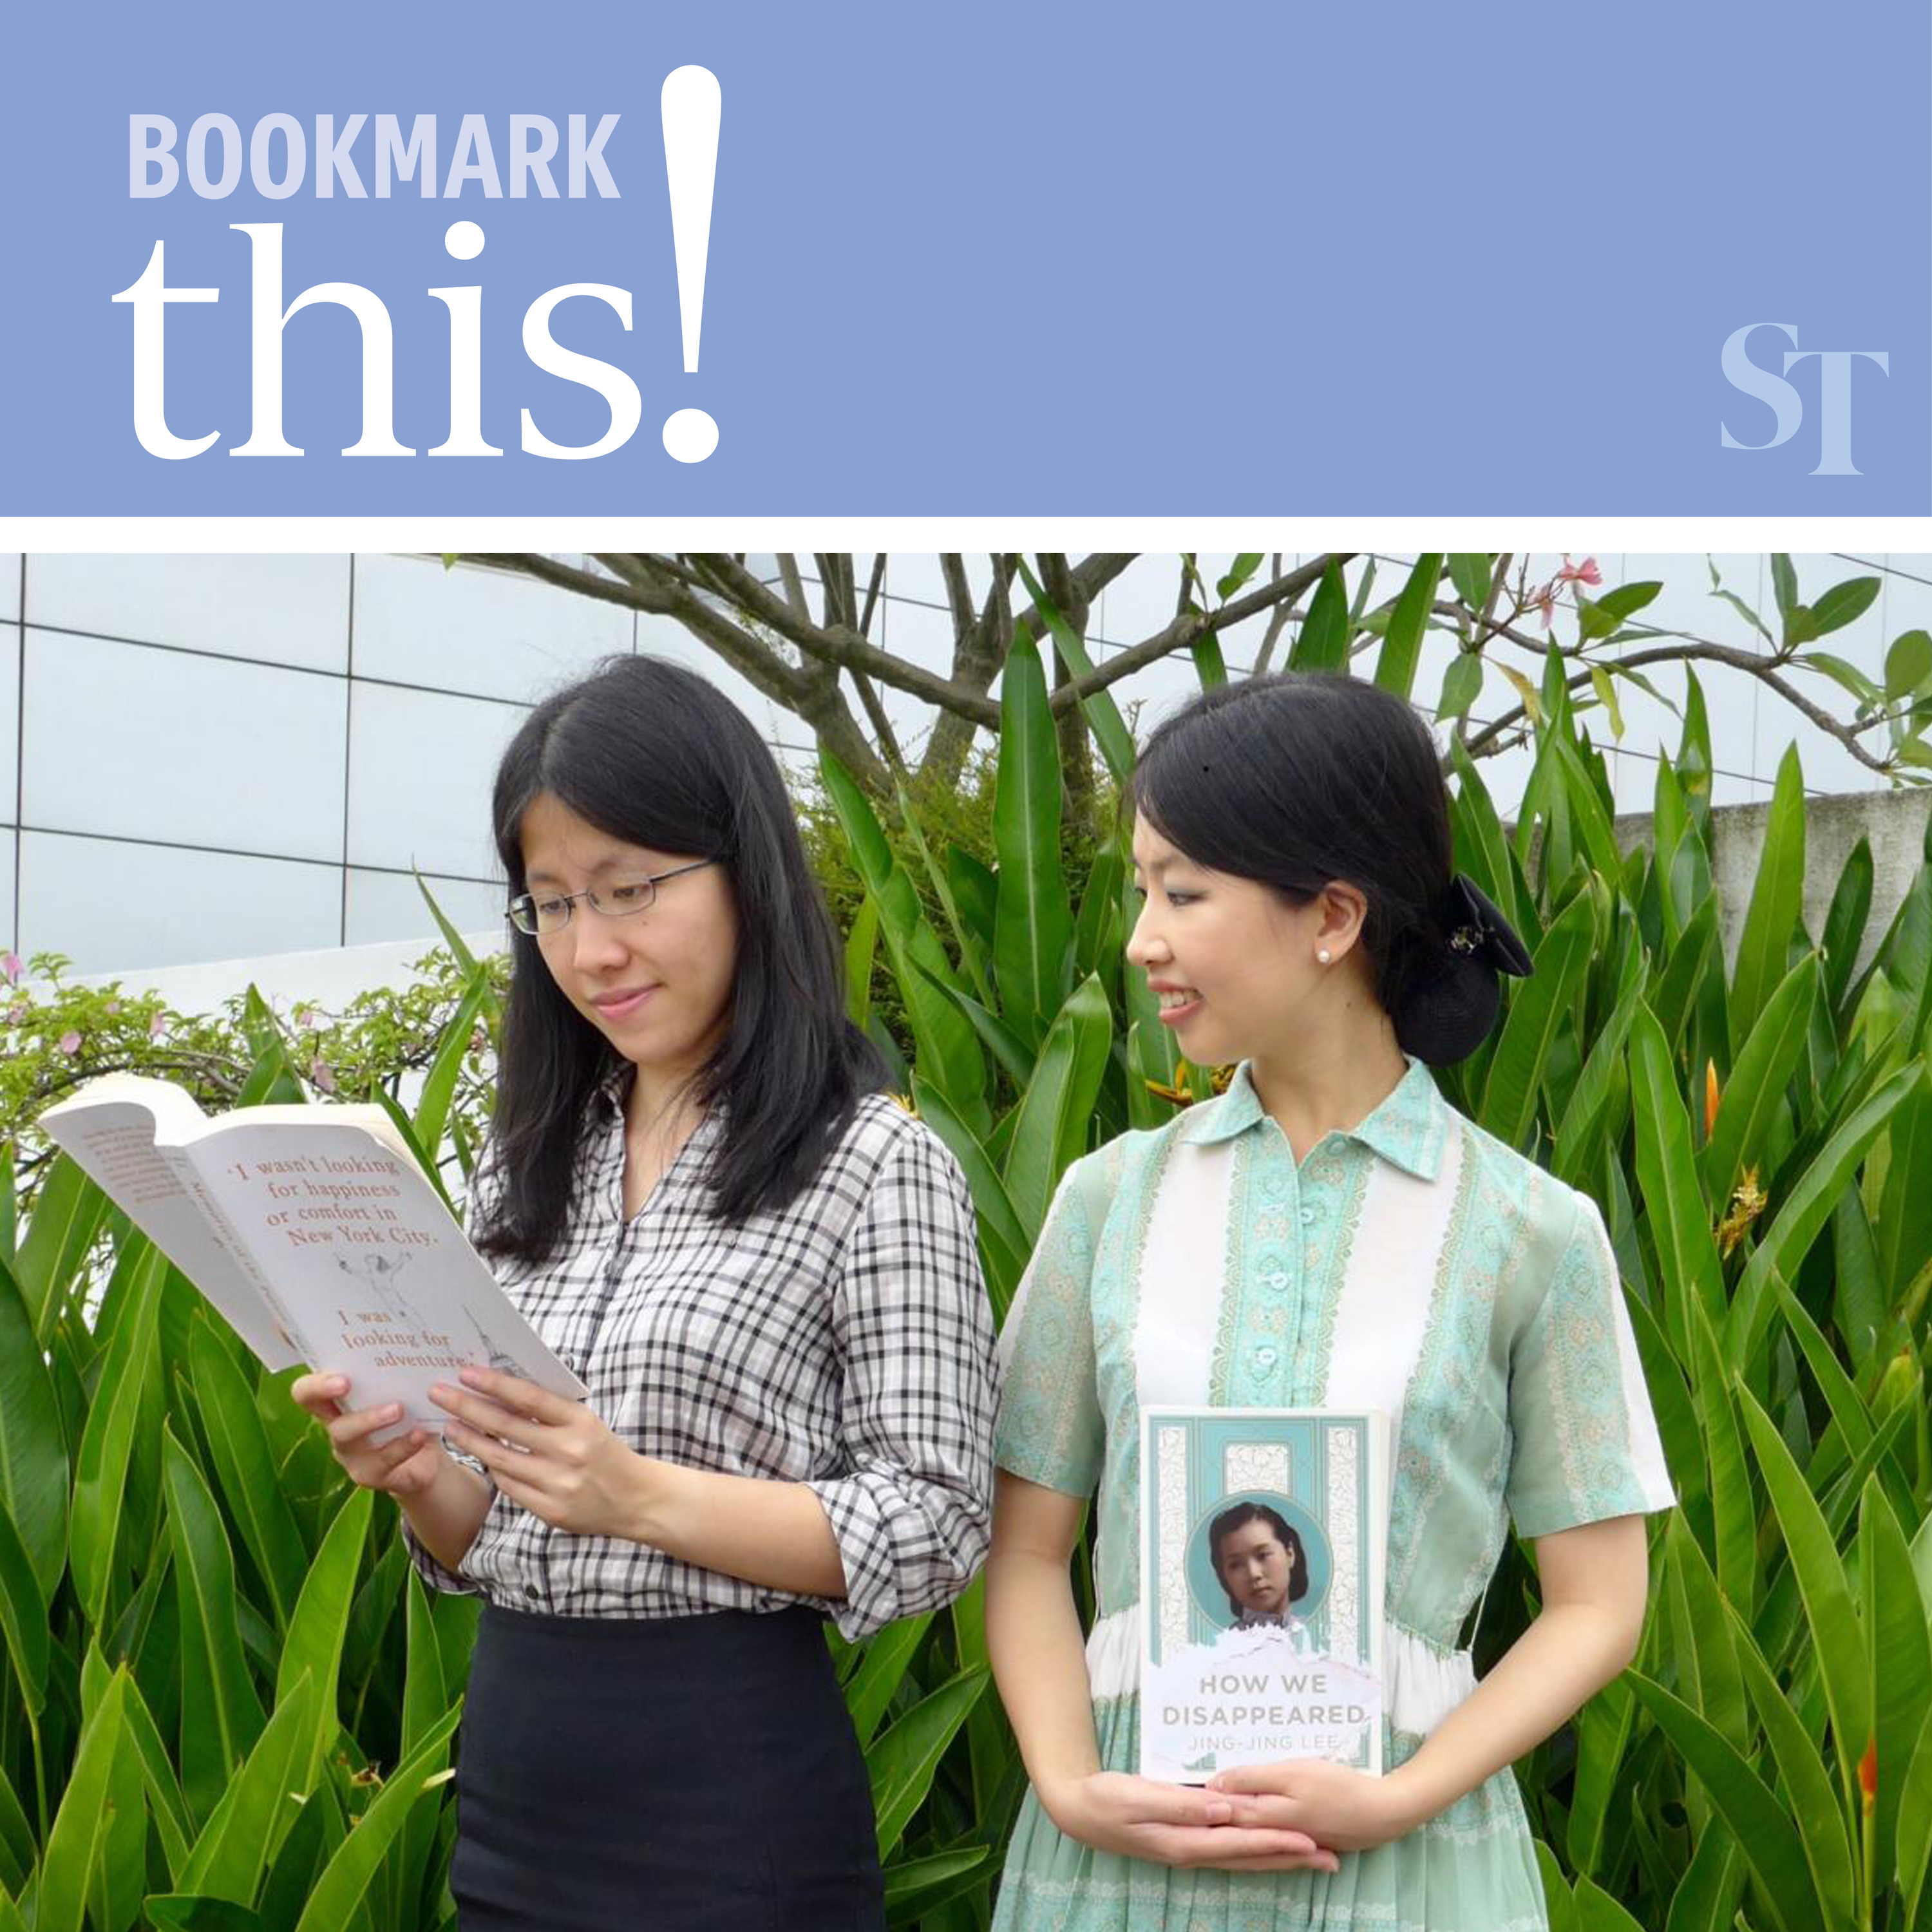 Singaporean Lee Jing-Jing's historical novel How We Disappeared; New York novelist Siri Hustvedt's Memories Of The Future: Bookmark This! Ep7